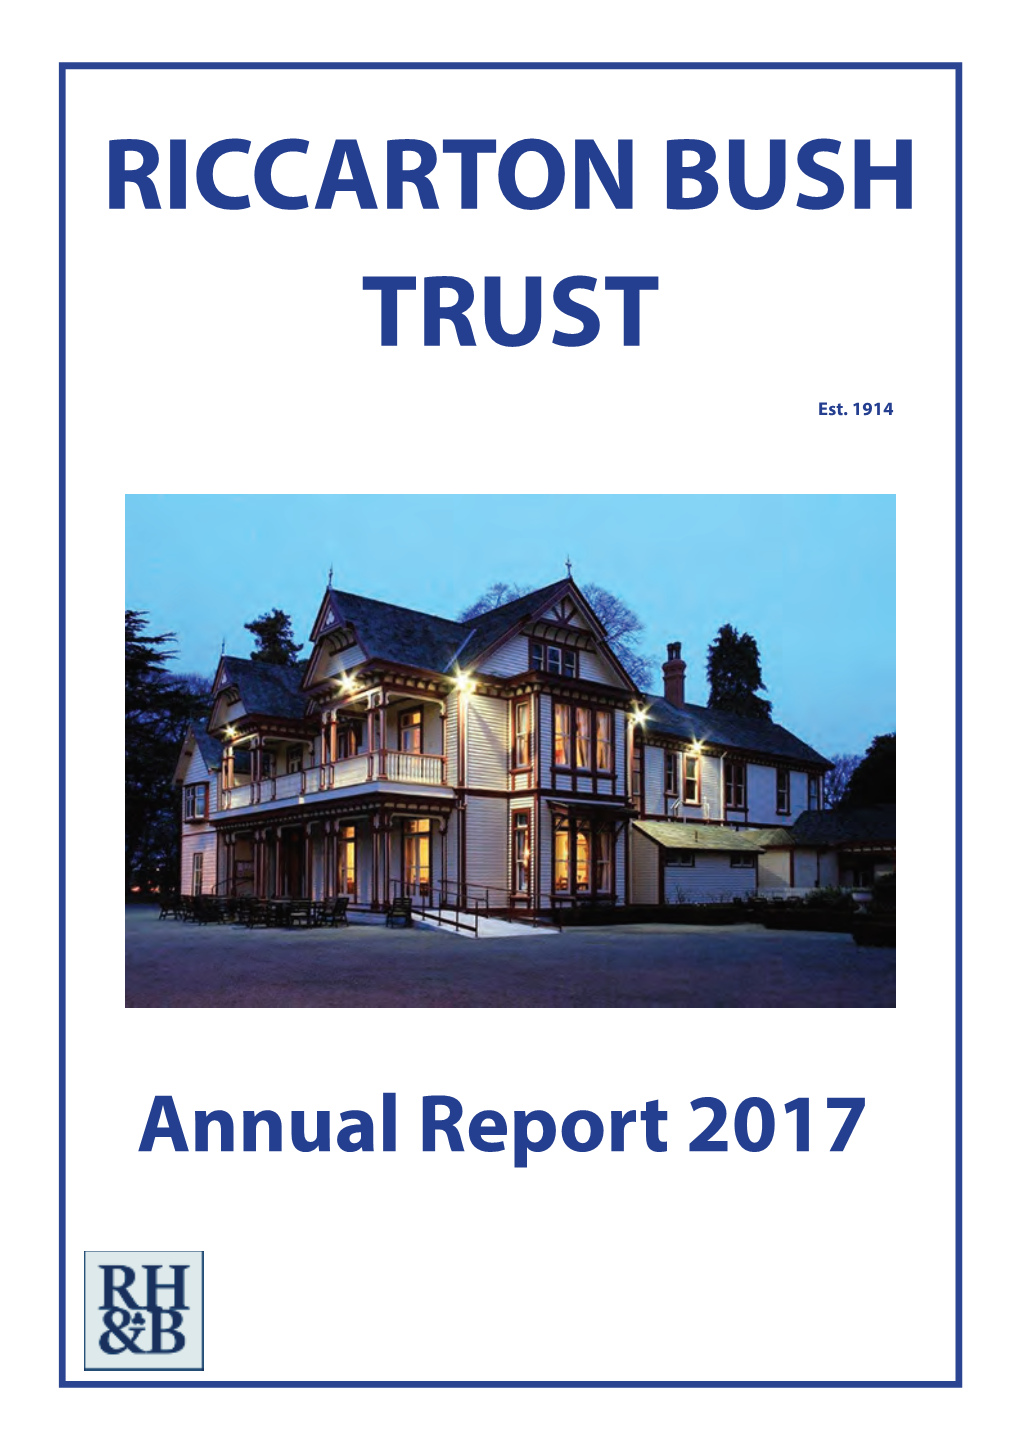 Riccarton Bush Trust Annual Report 2017 Page 2 Report from the Chairman and Manager